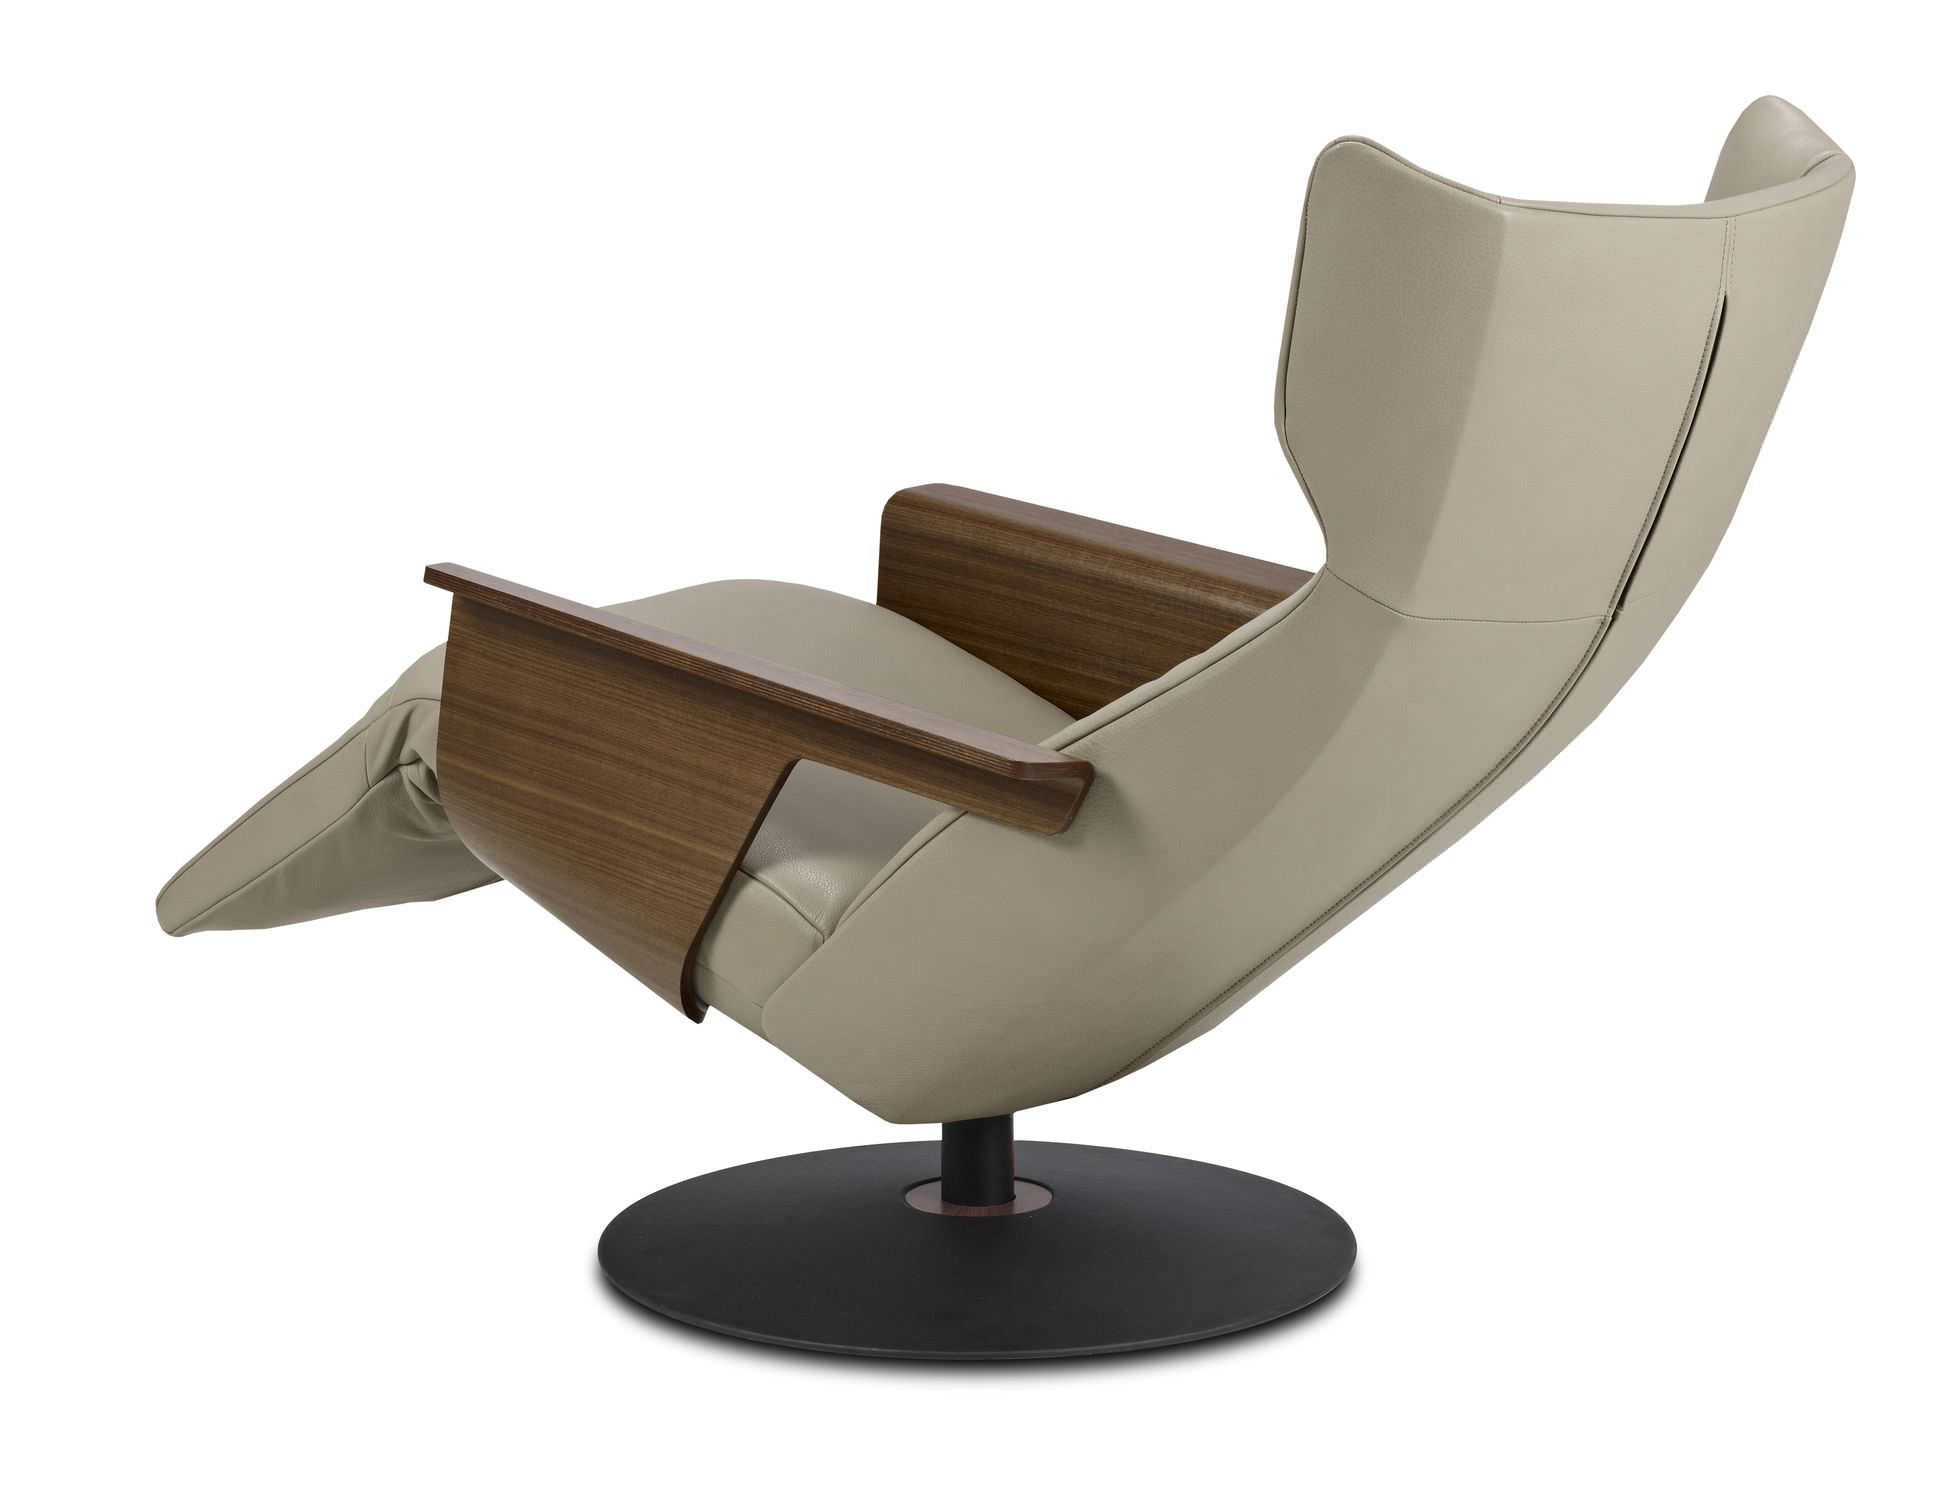 Contemporary leather recliner armchair with footstool - OREA by Christophe  Giraud - JORI